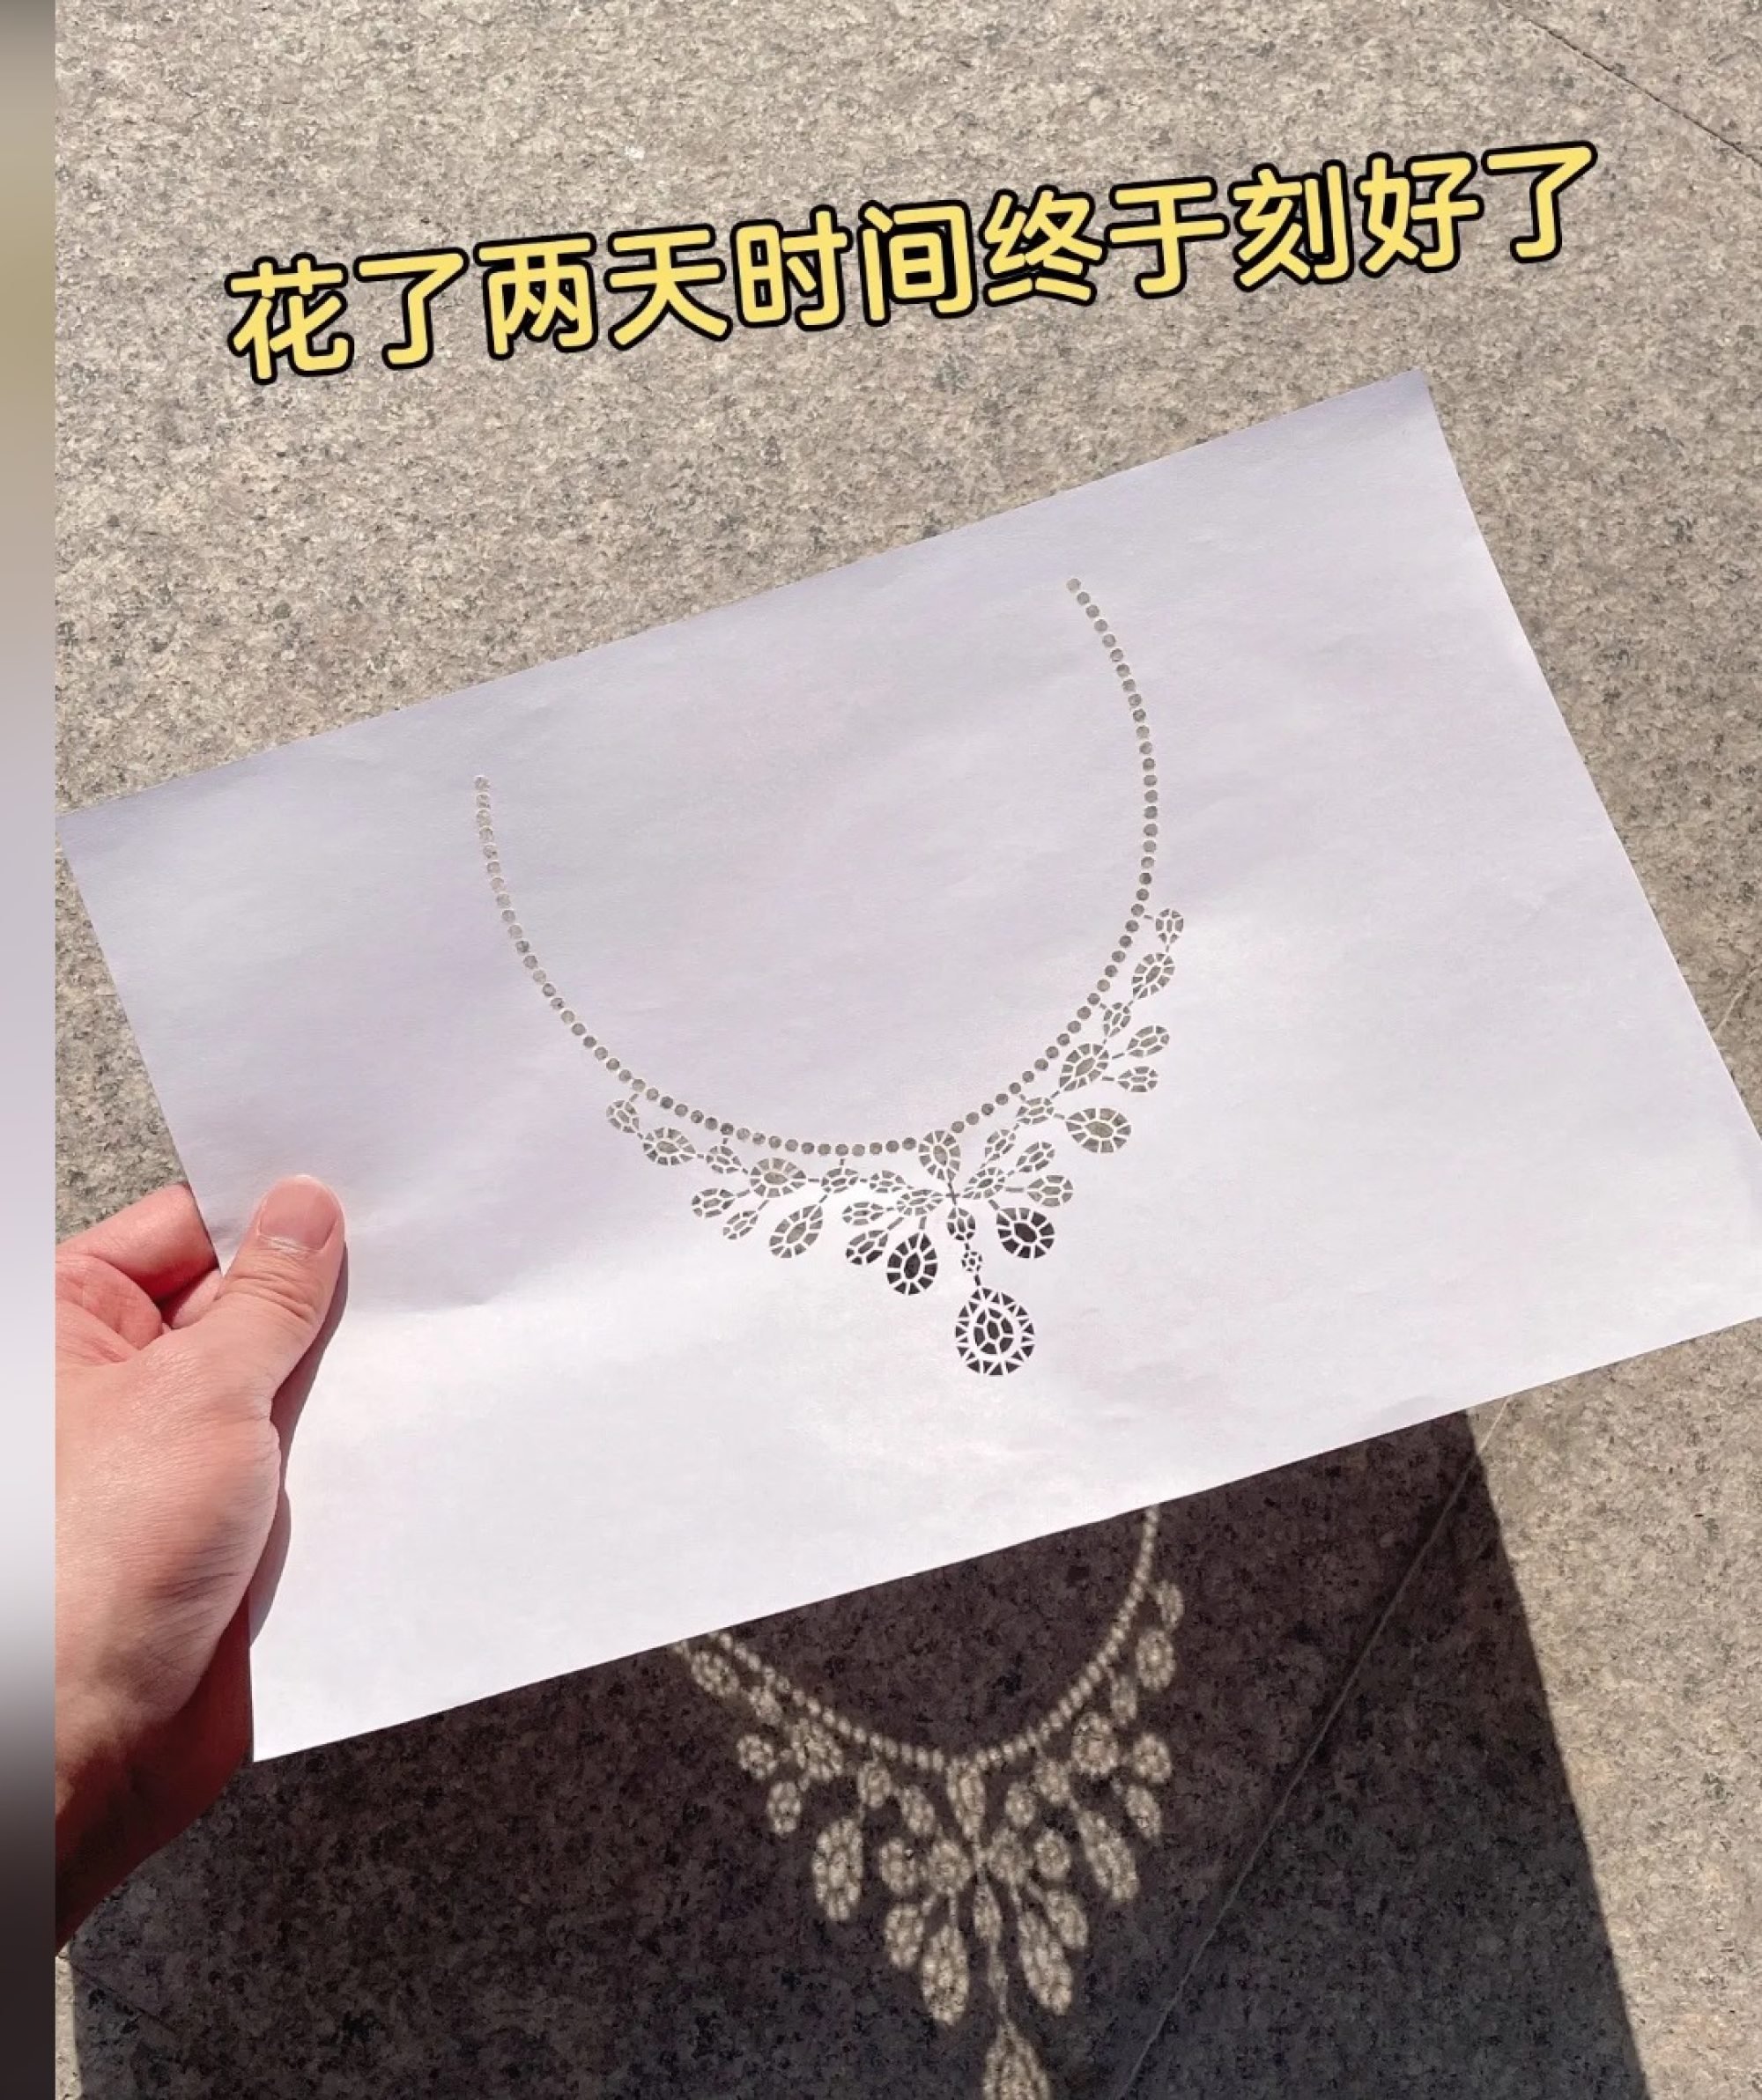 The light necklace is not the first stencil projection Zhang has created, last year he made a light diamond ring for his girlfriend as well. Photo: Douyin